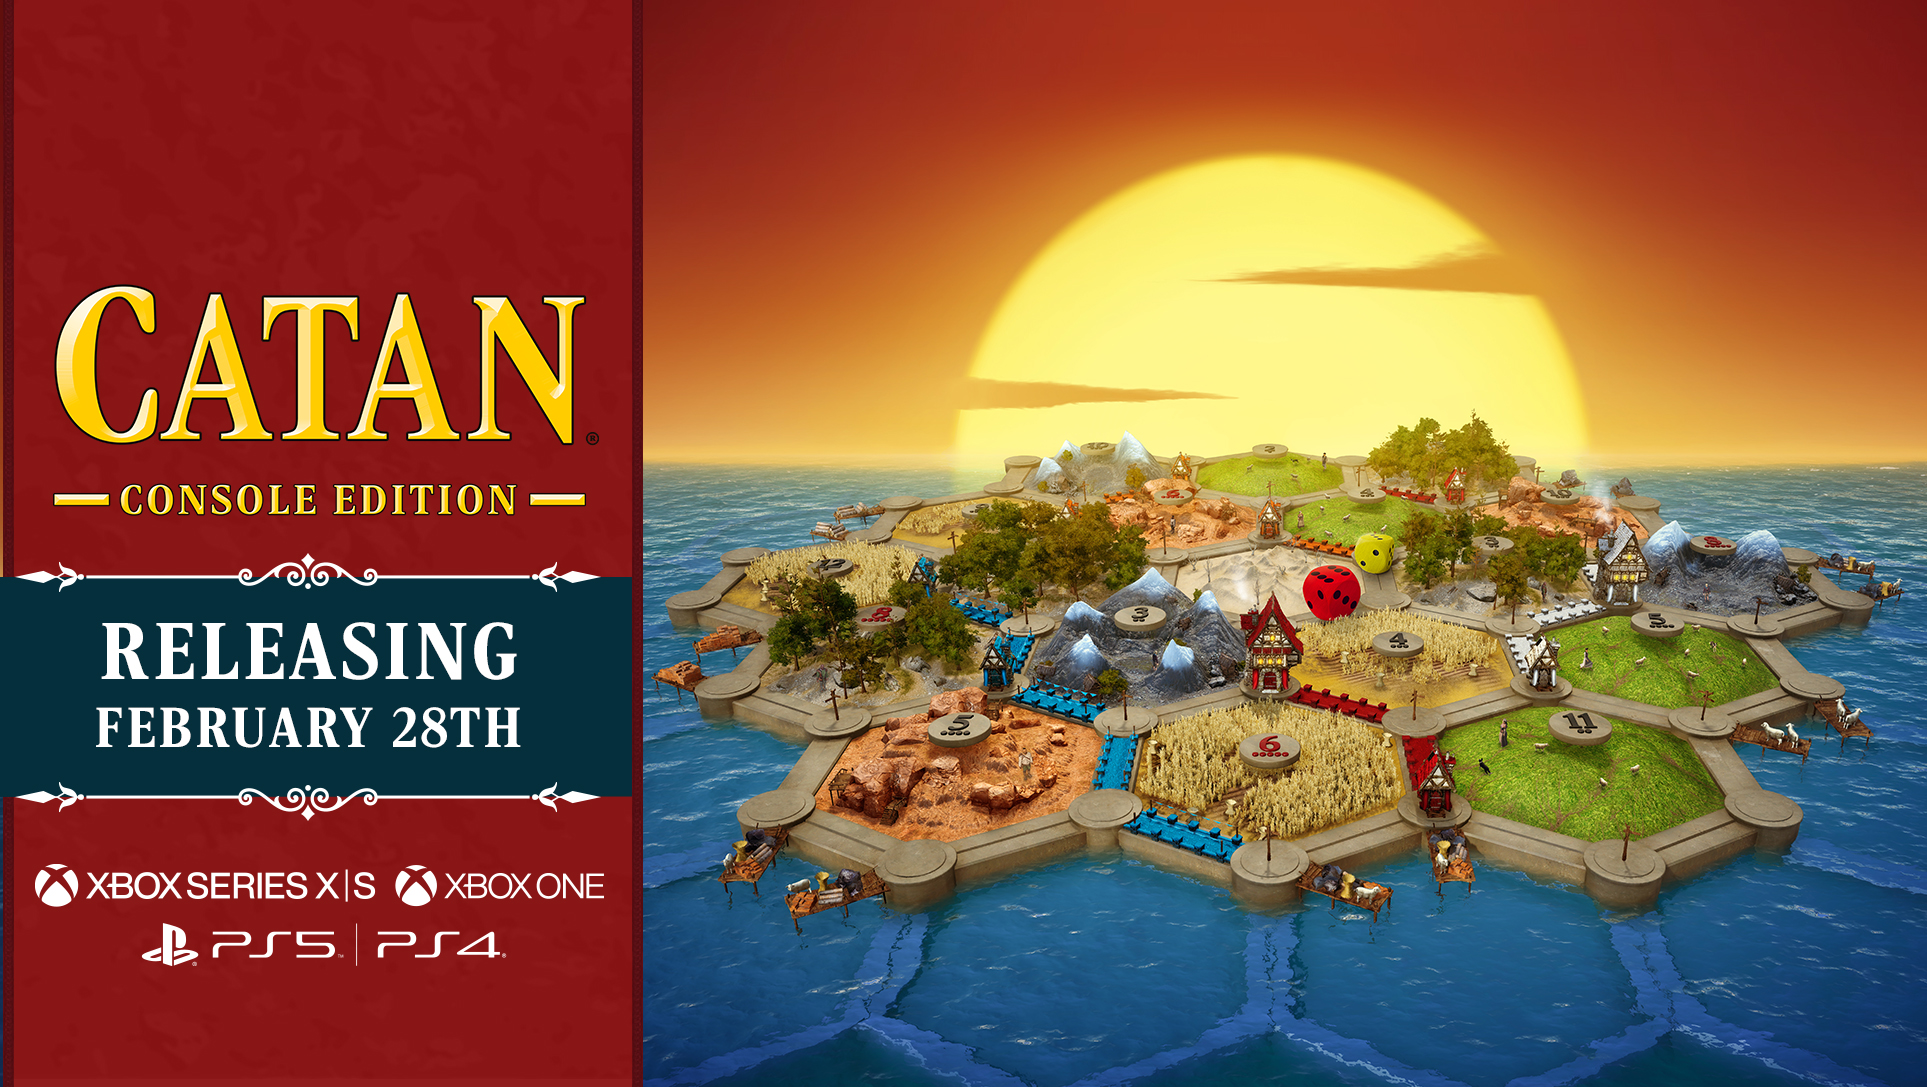 Catan Console Edition lands on PlayStation and Xbox on Feb. 28